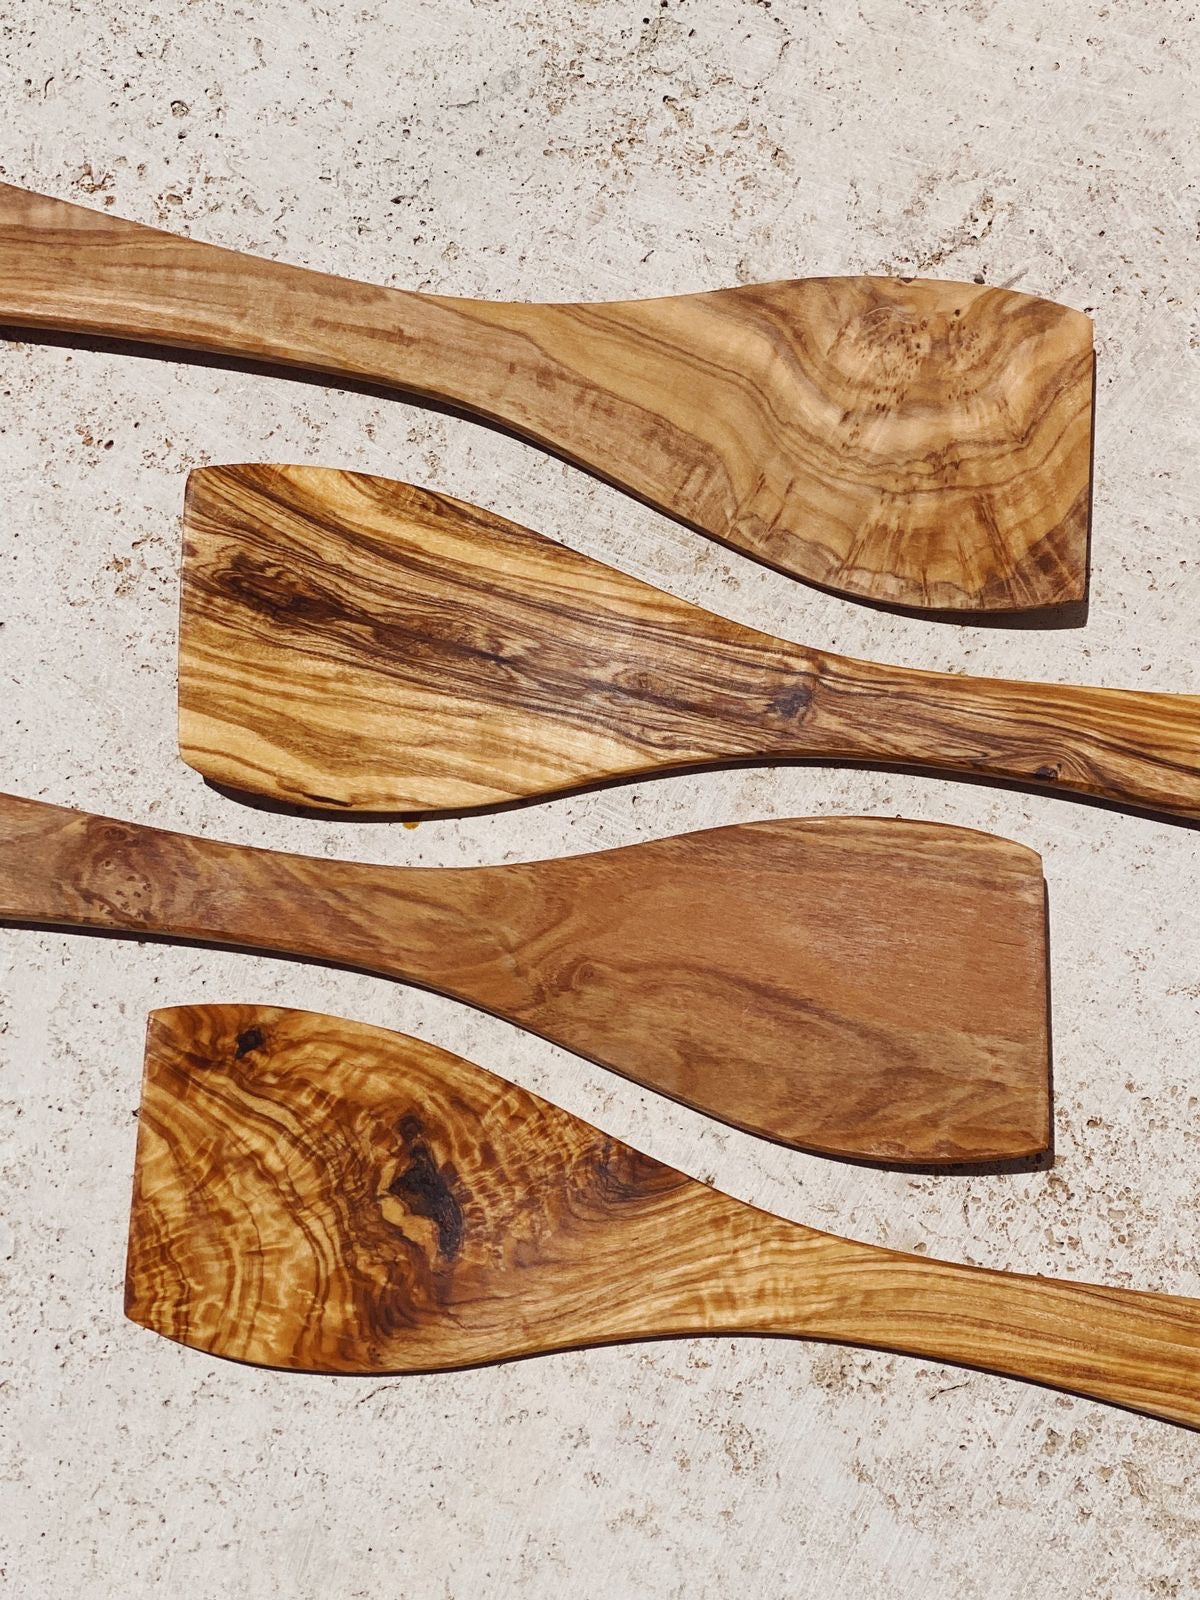 olive wood cooking utensil